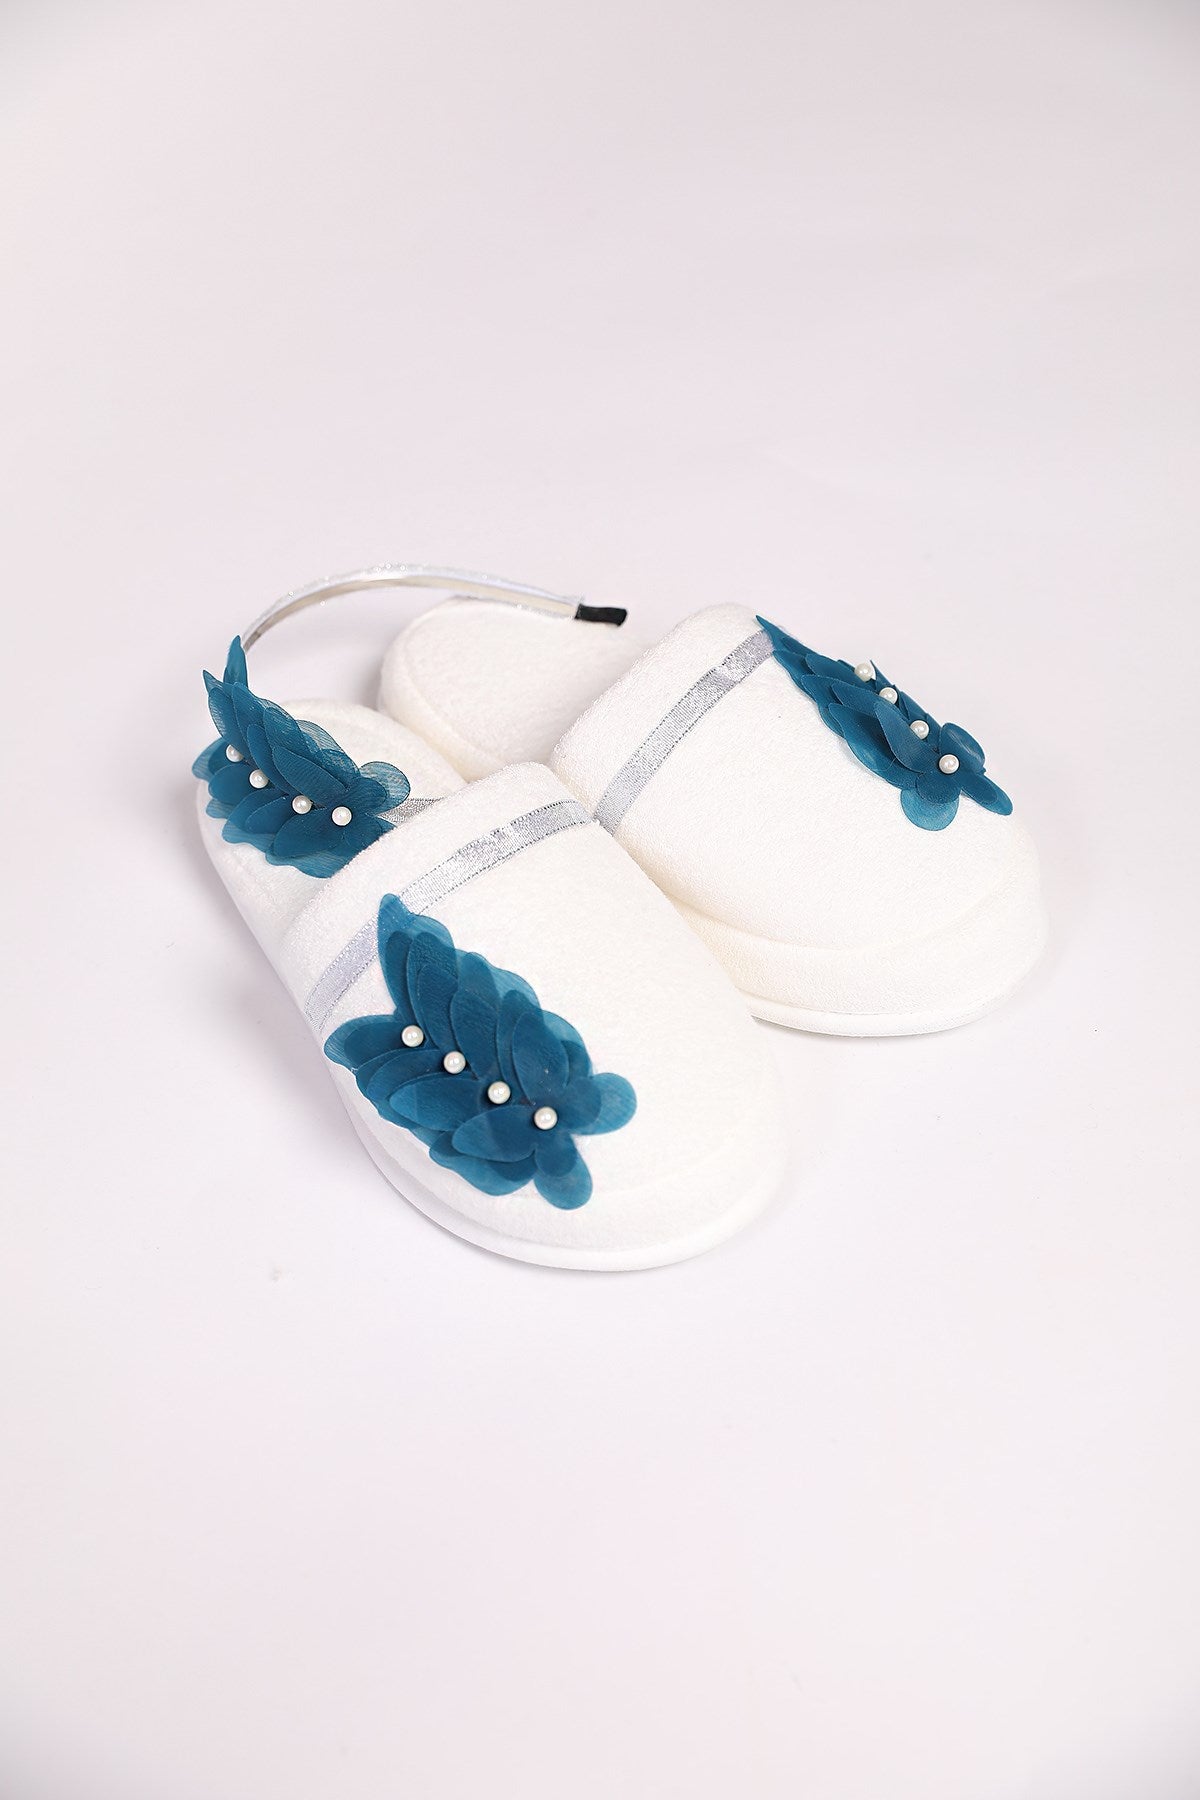 Shopymommy 757102 Butterfly Maternity Crown & Maternity Slippers Set Petrol